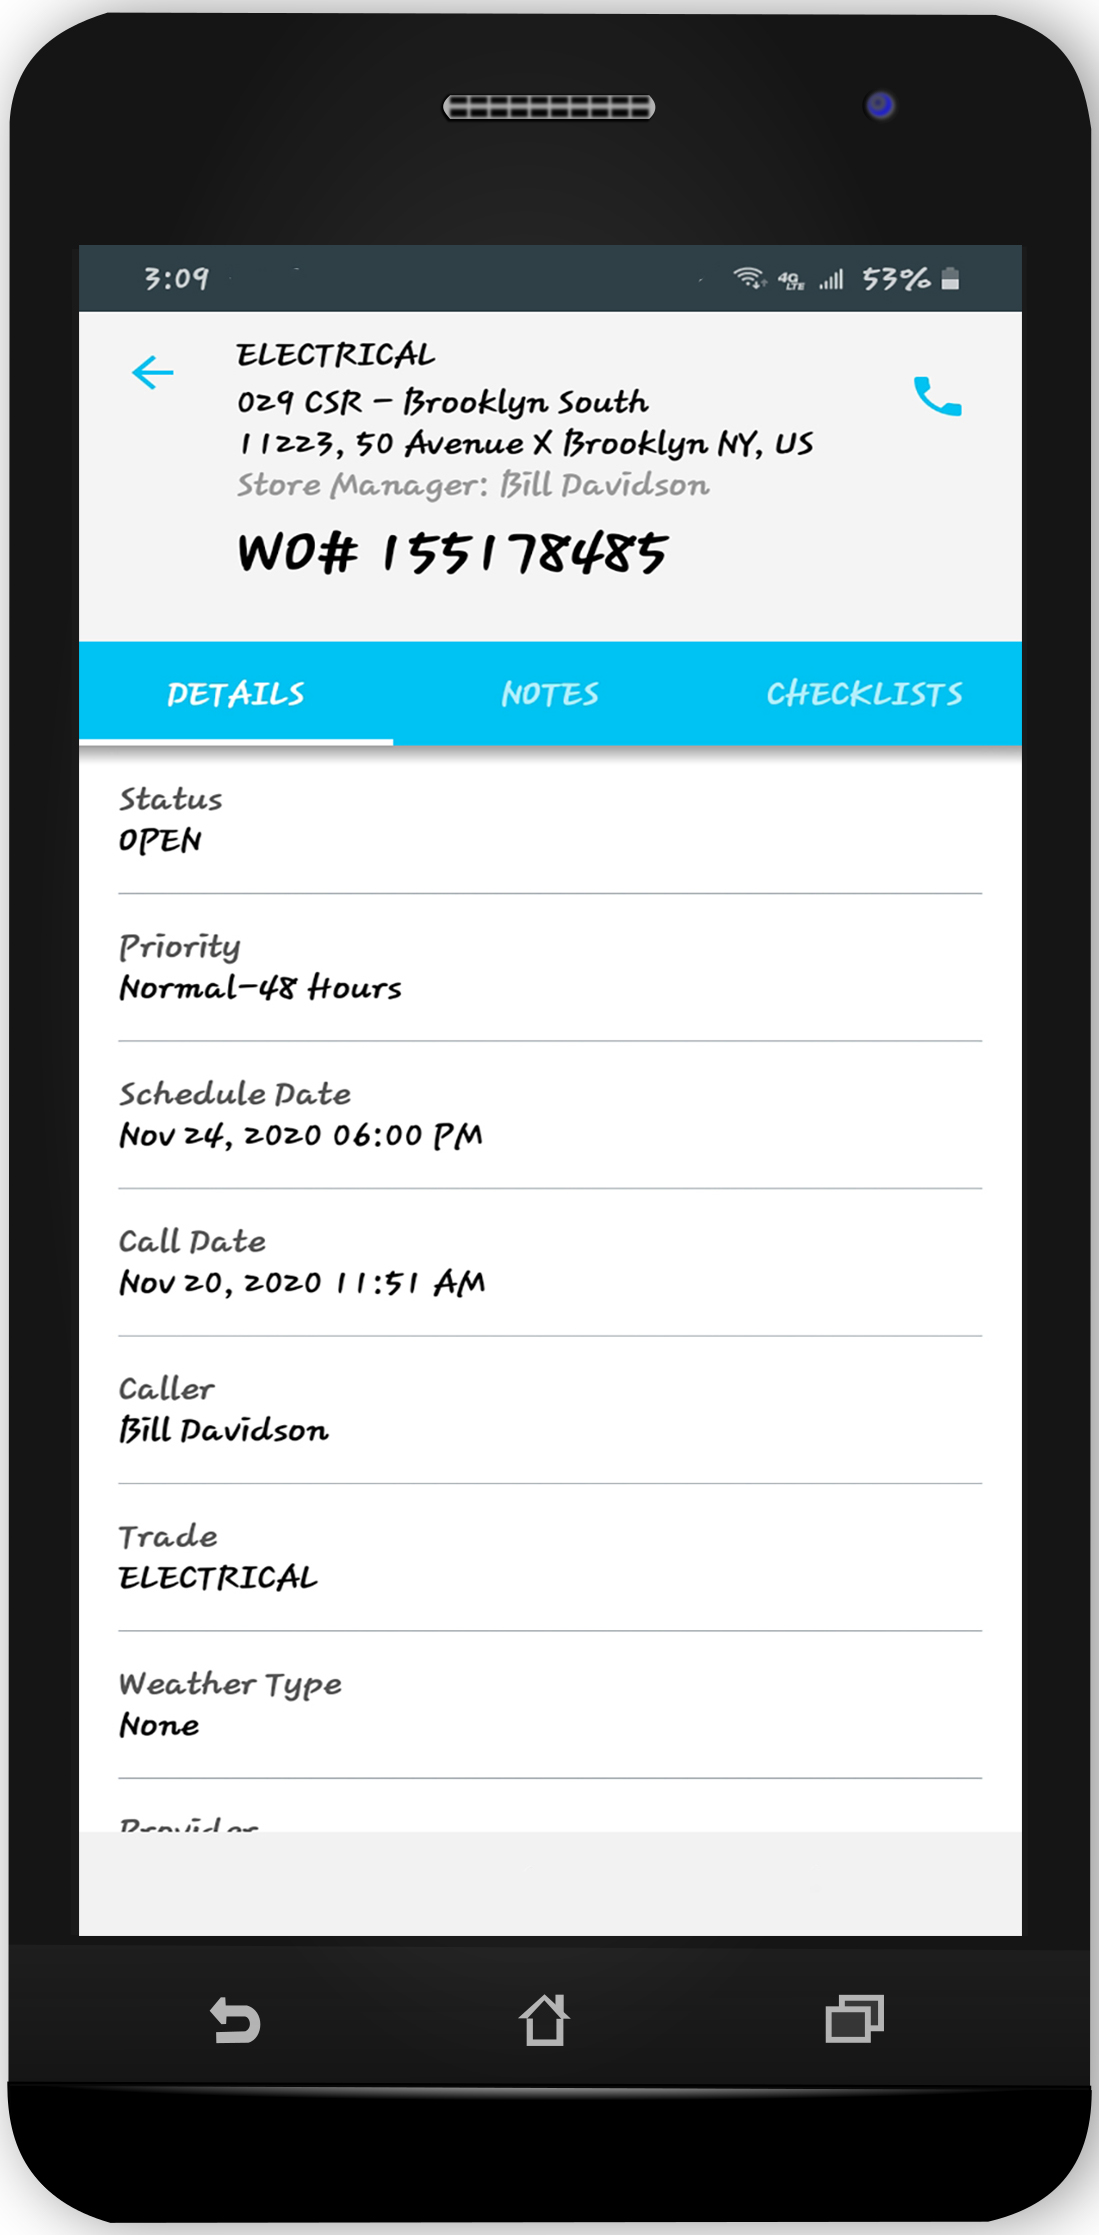 Details of a work order from within the mobile app.